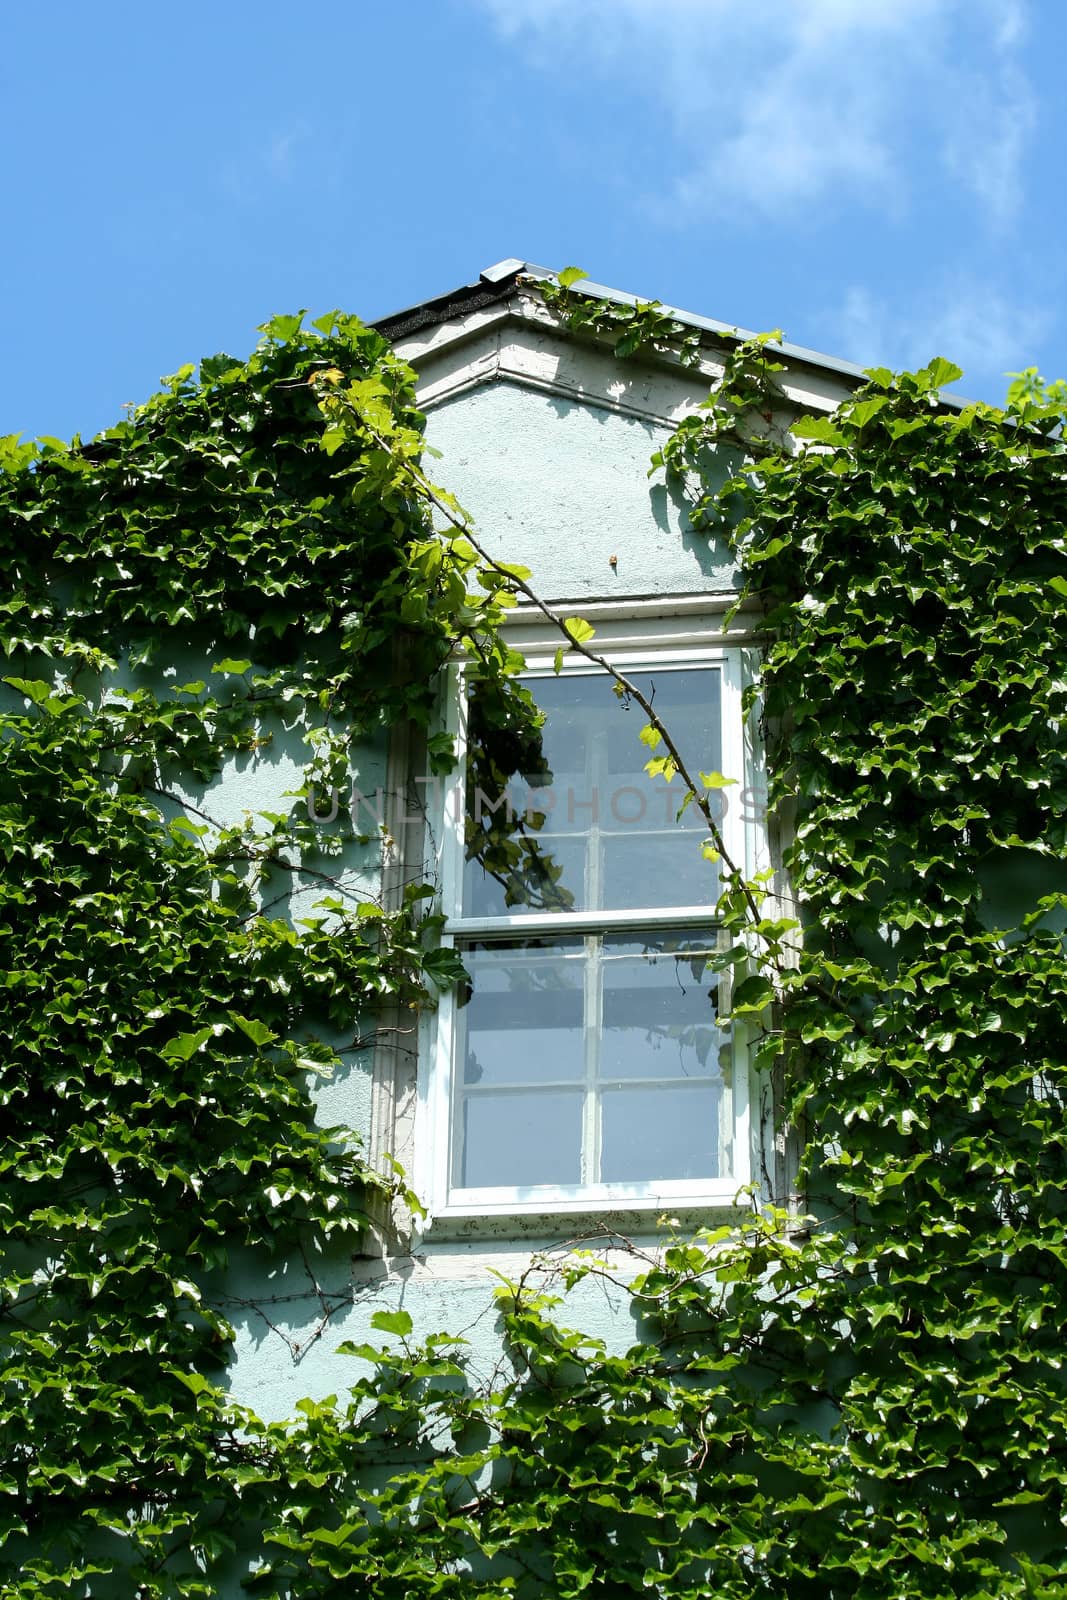 A Ivy covered building